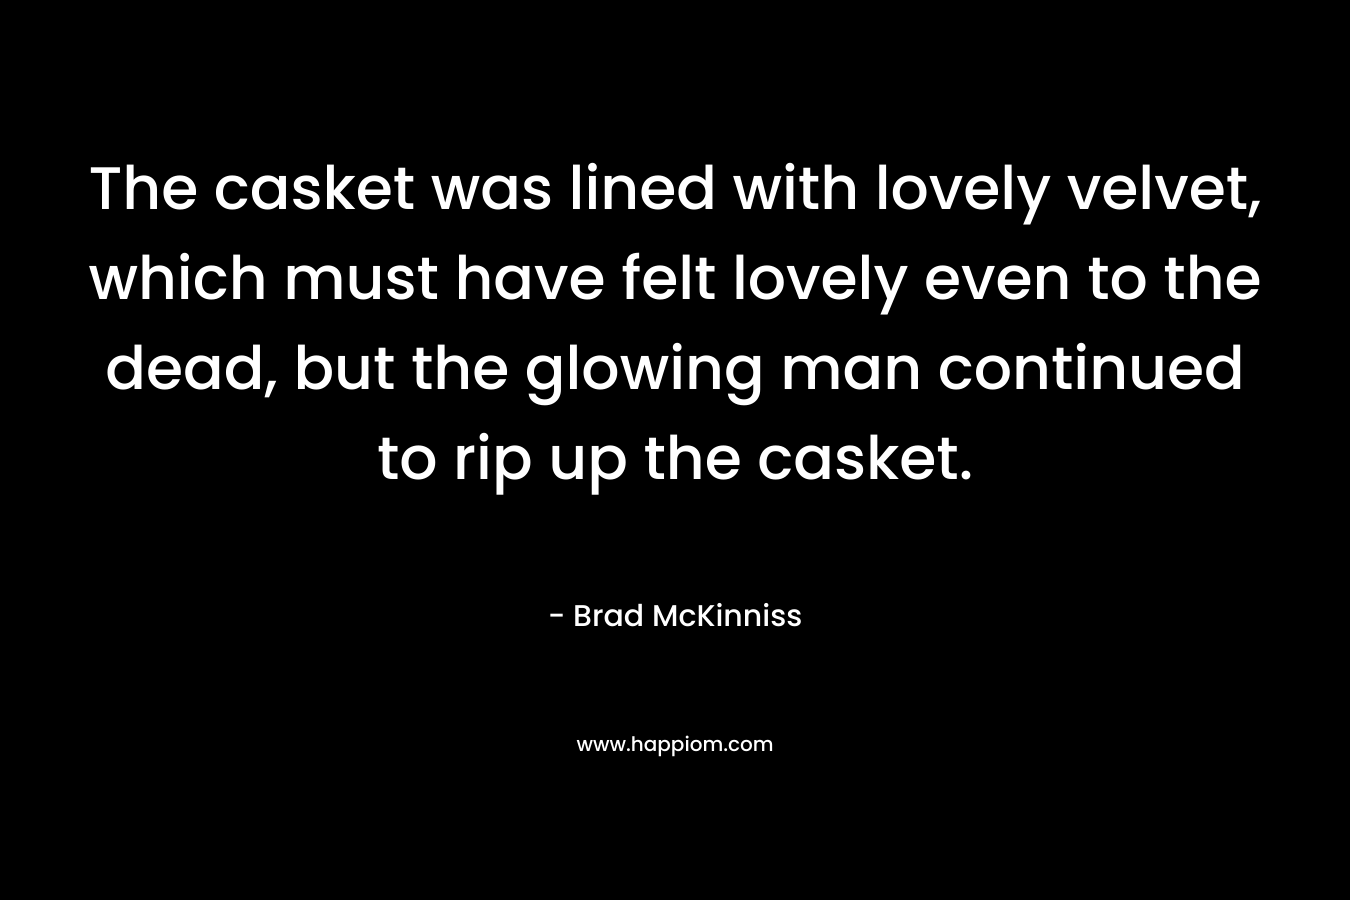 The casket was lined with lovely velvet, which must have felt lovely even to the dead, but the glowing man continued to rip up the casket. – Brad McKinniss